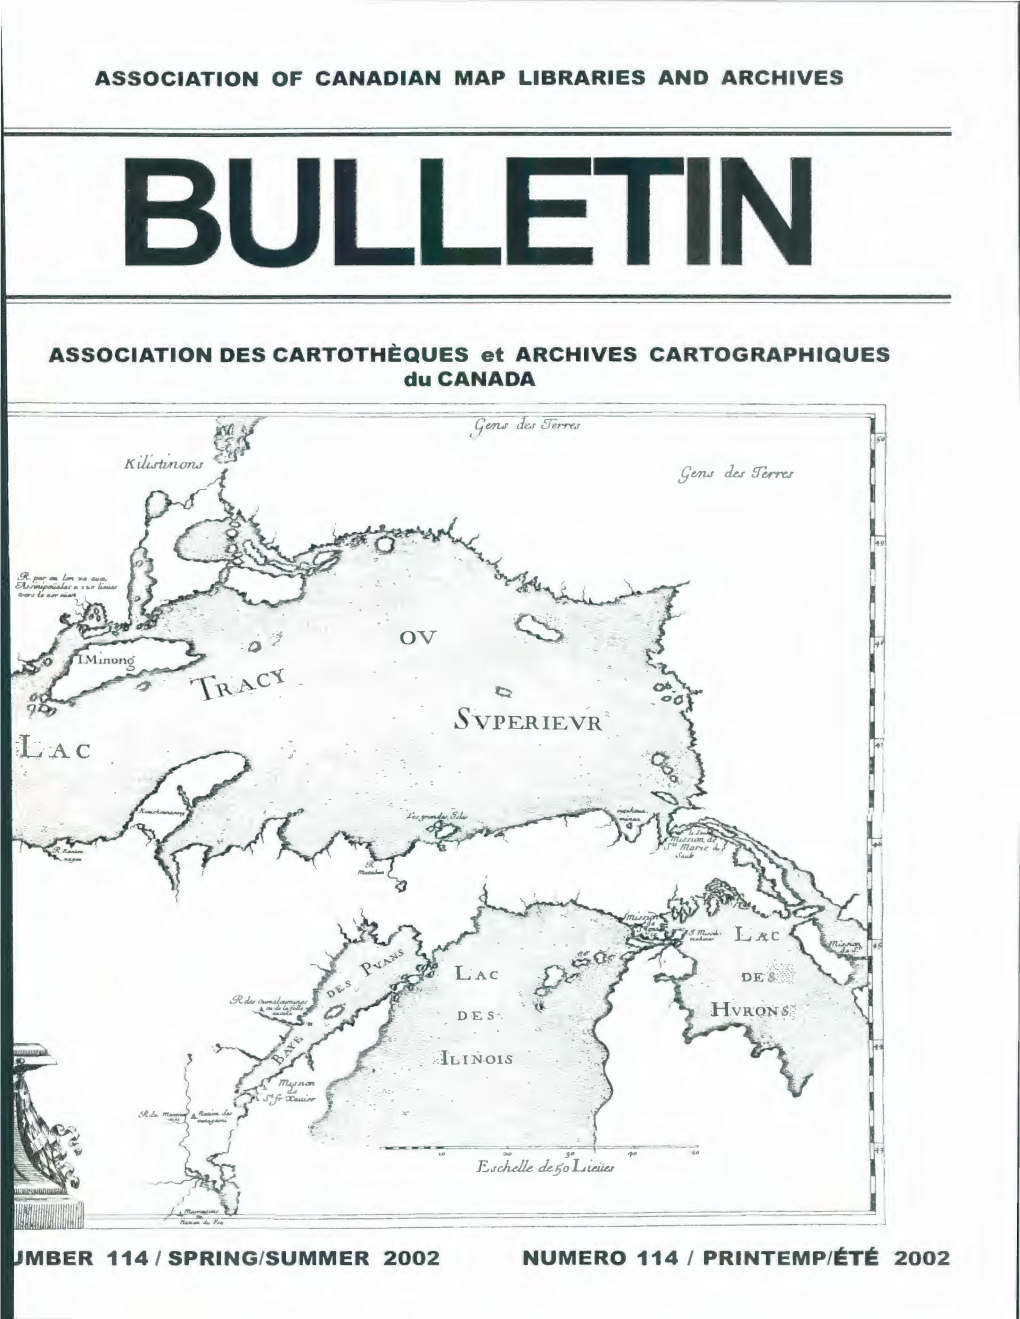 Association of Canadian Map Libraries and Archives